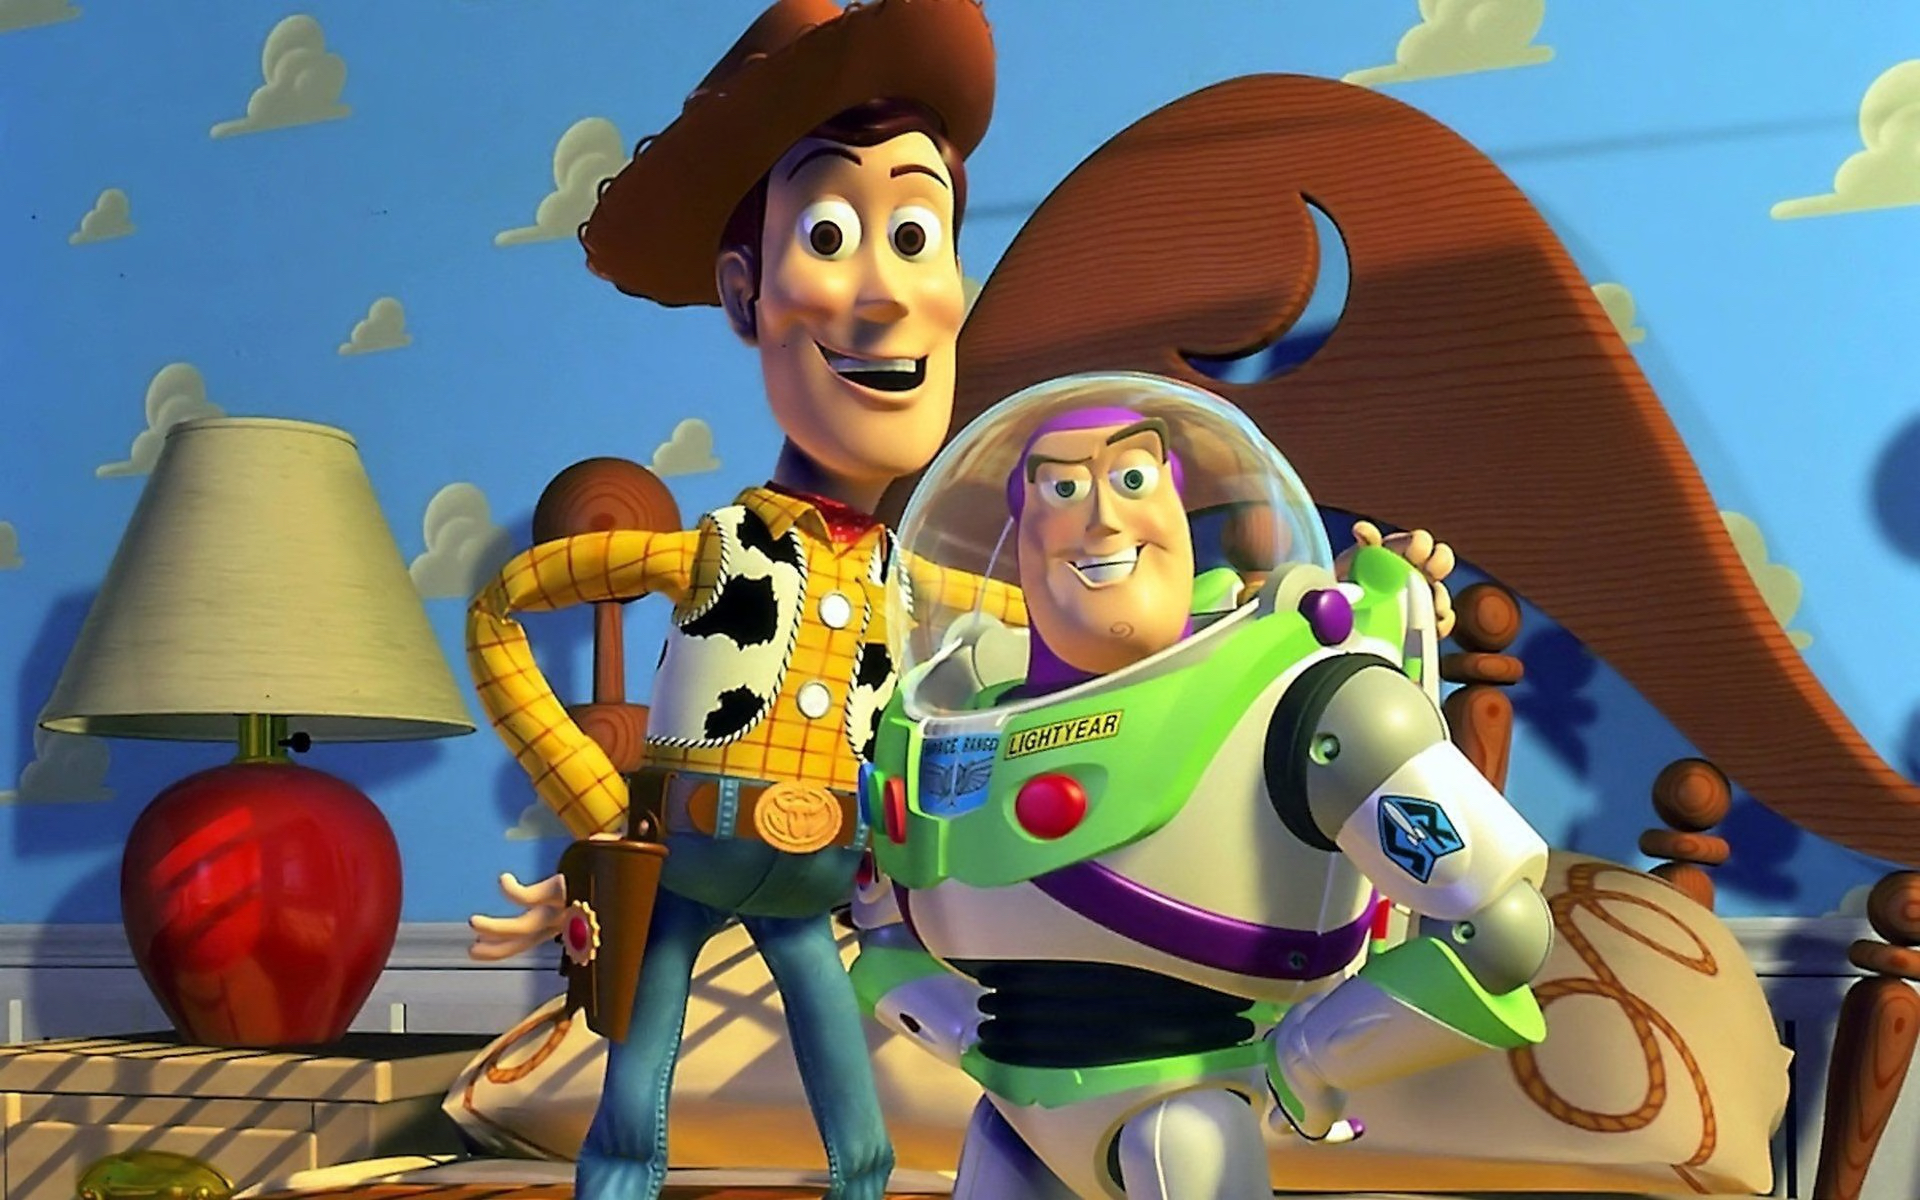 Tim Allen Confirms Disney Has Reached Out to Him About Next ‘Toy Story’ Film And Also Shares His Ideas For Where the Story Could Go